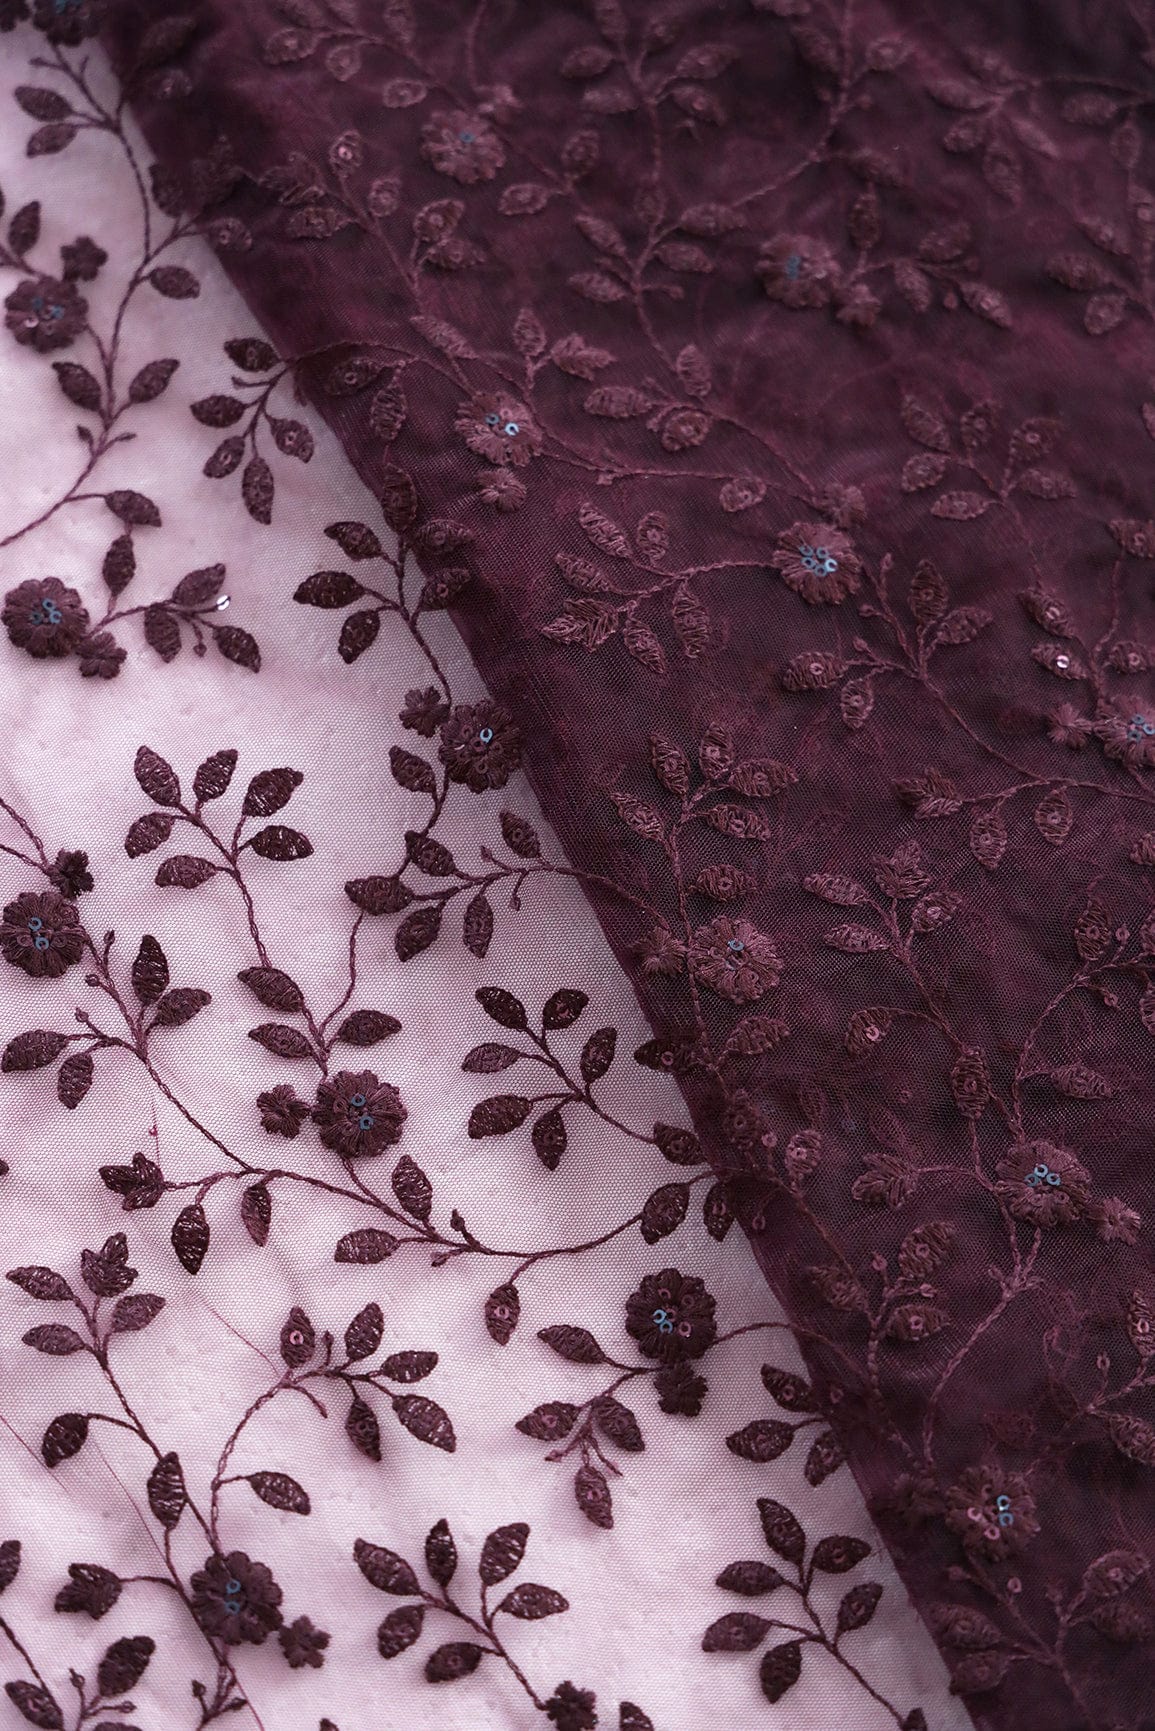 doeraa Embroidery Fabrics Wine Thread And Sequins Floral Heavy Embroidery Work On Wine Soft Net Fabric